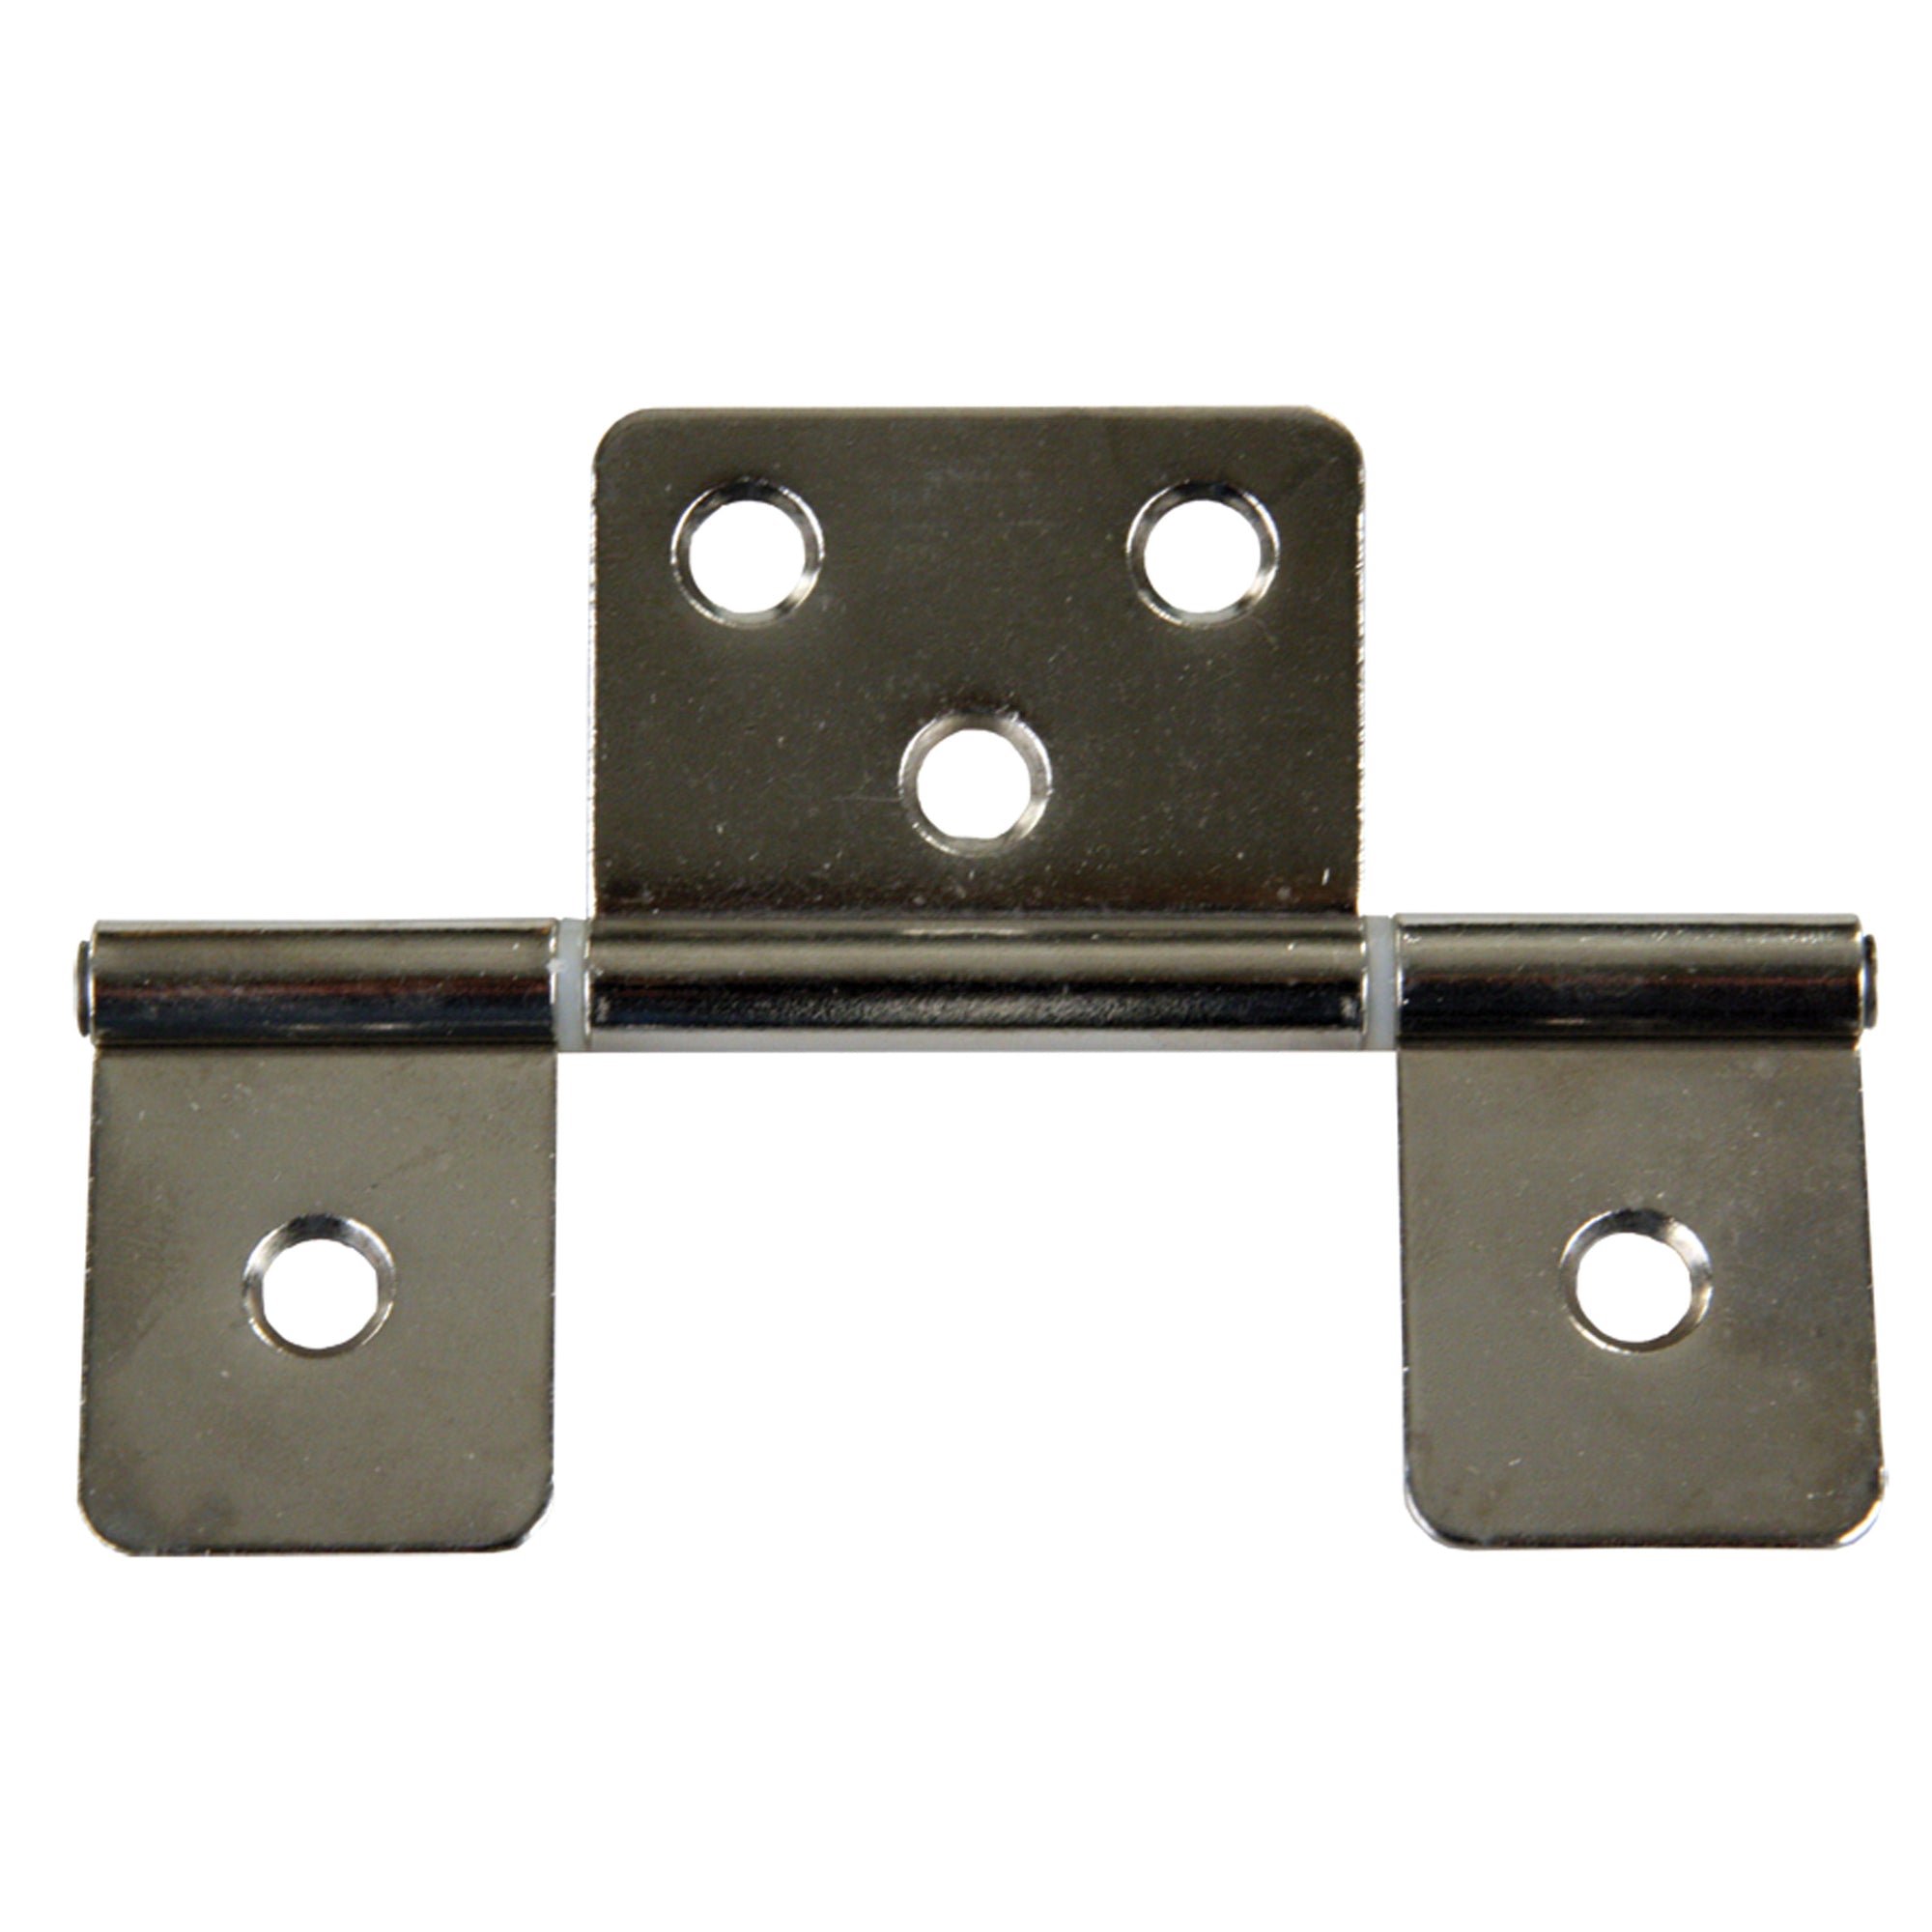 JR Products 70635 Non-Mortise Hinge - Satin Nickel